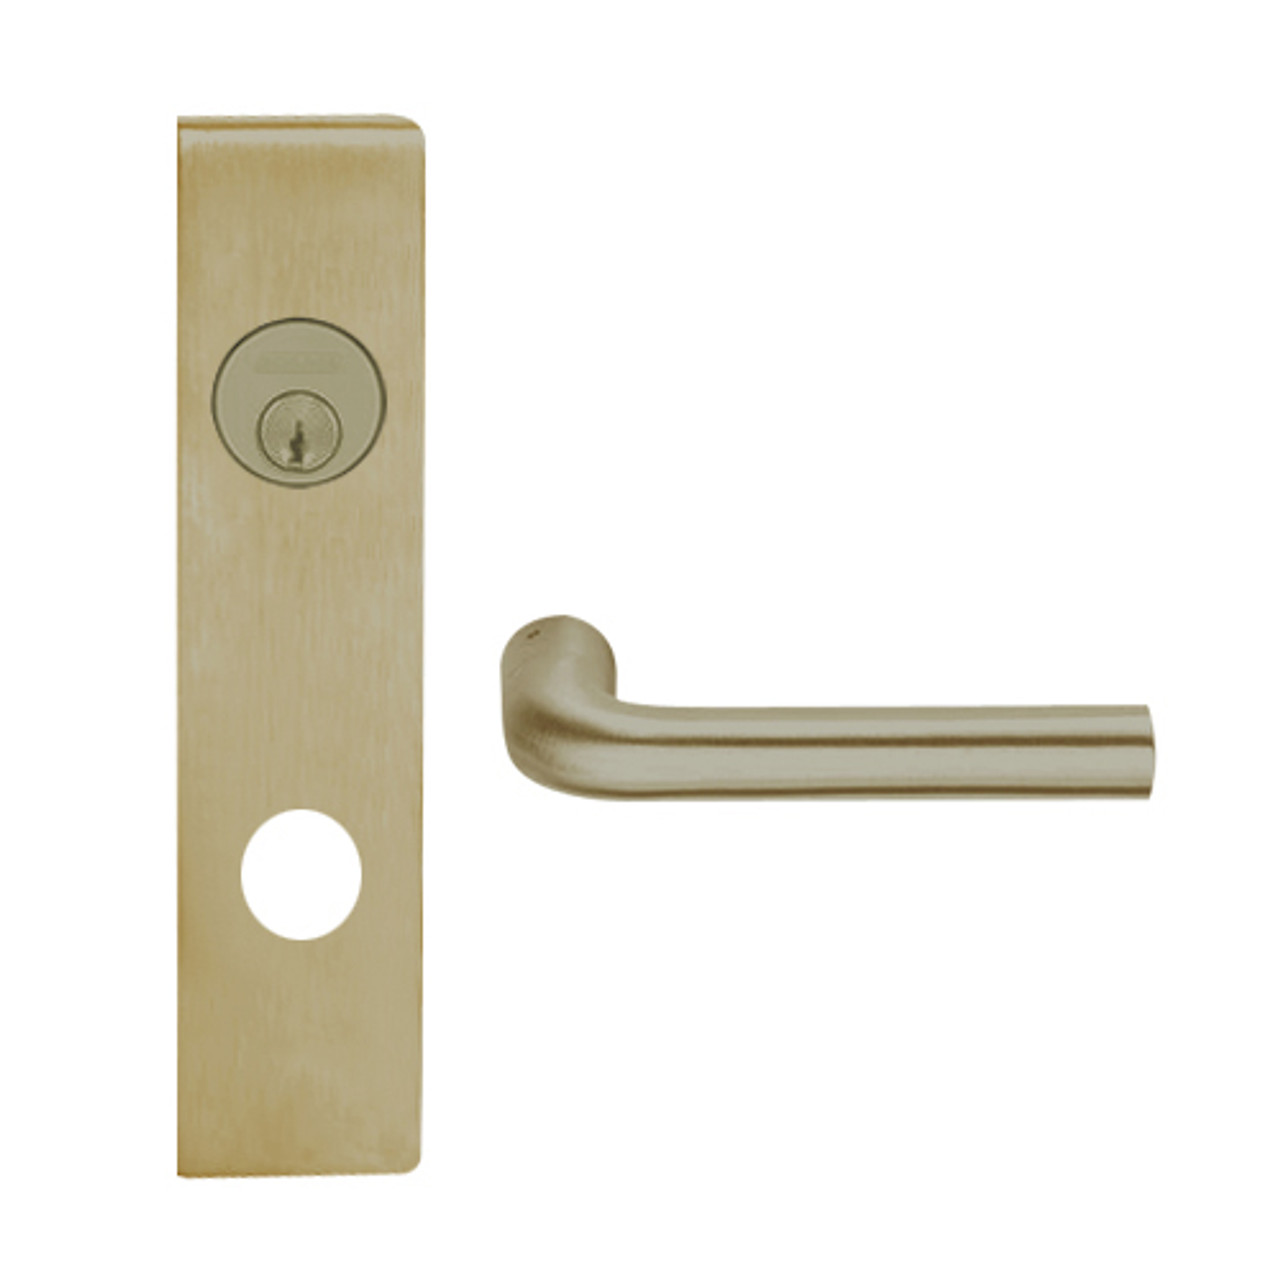 L9453L-02L-613 Schlage L Series Less Cylinder Entrance with Deadbolt Commercial Mortise Lock with 02 Cast Lever Design in Oil Rubbed Bronze